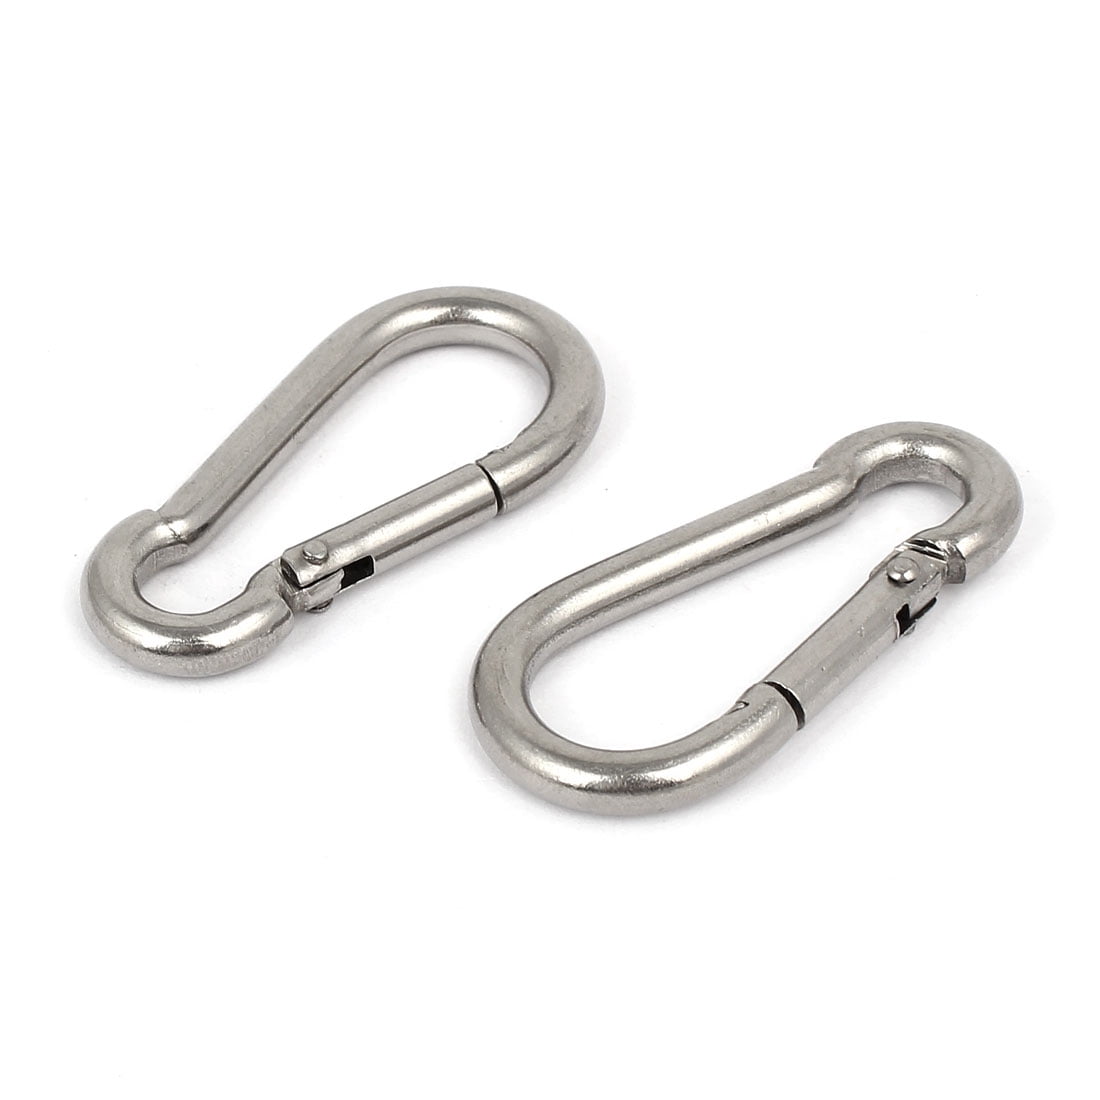 Stainless Steel Carabiner Clip Snap Hook Spring Loaded Carabina Carbine 50mm 